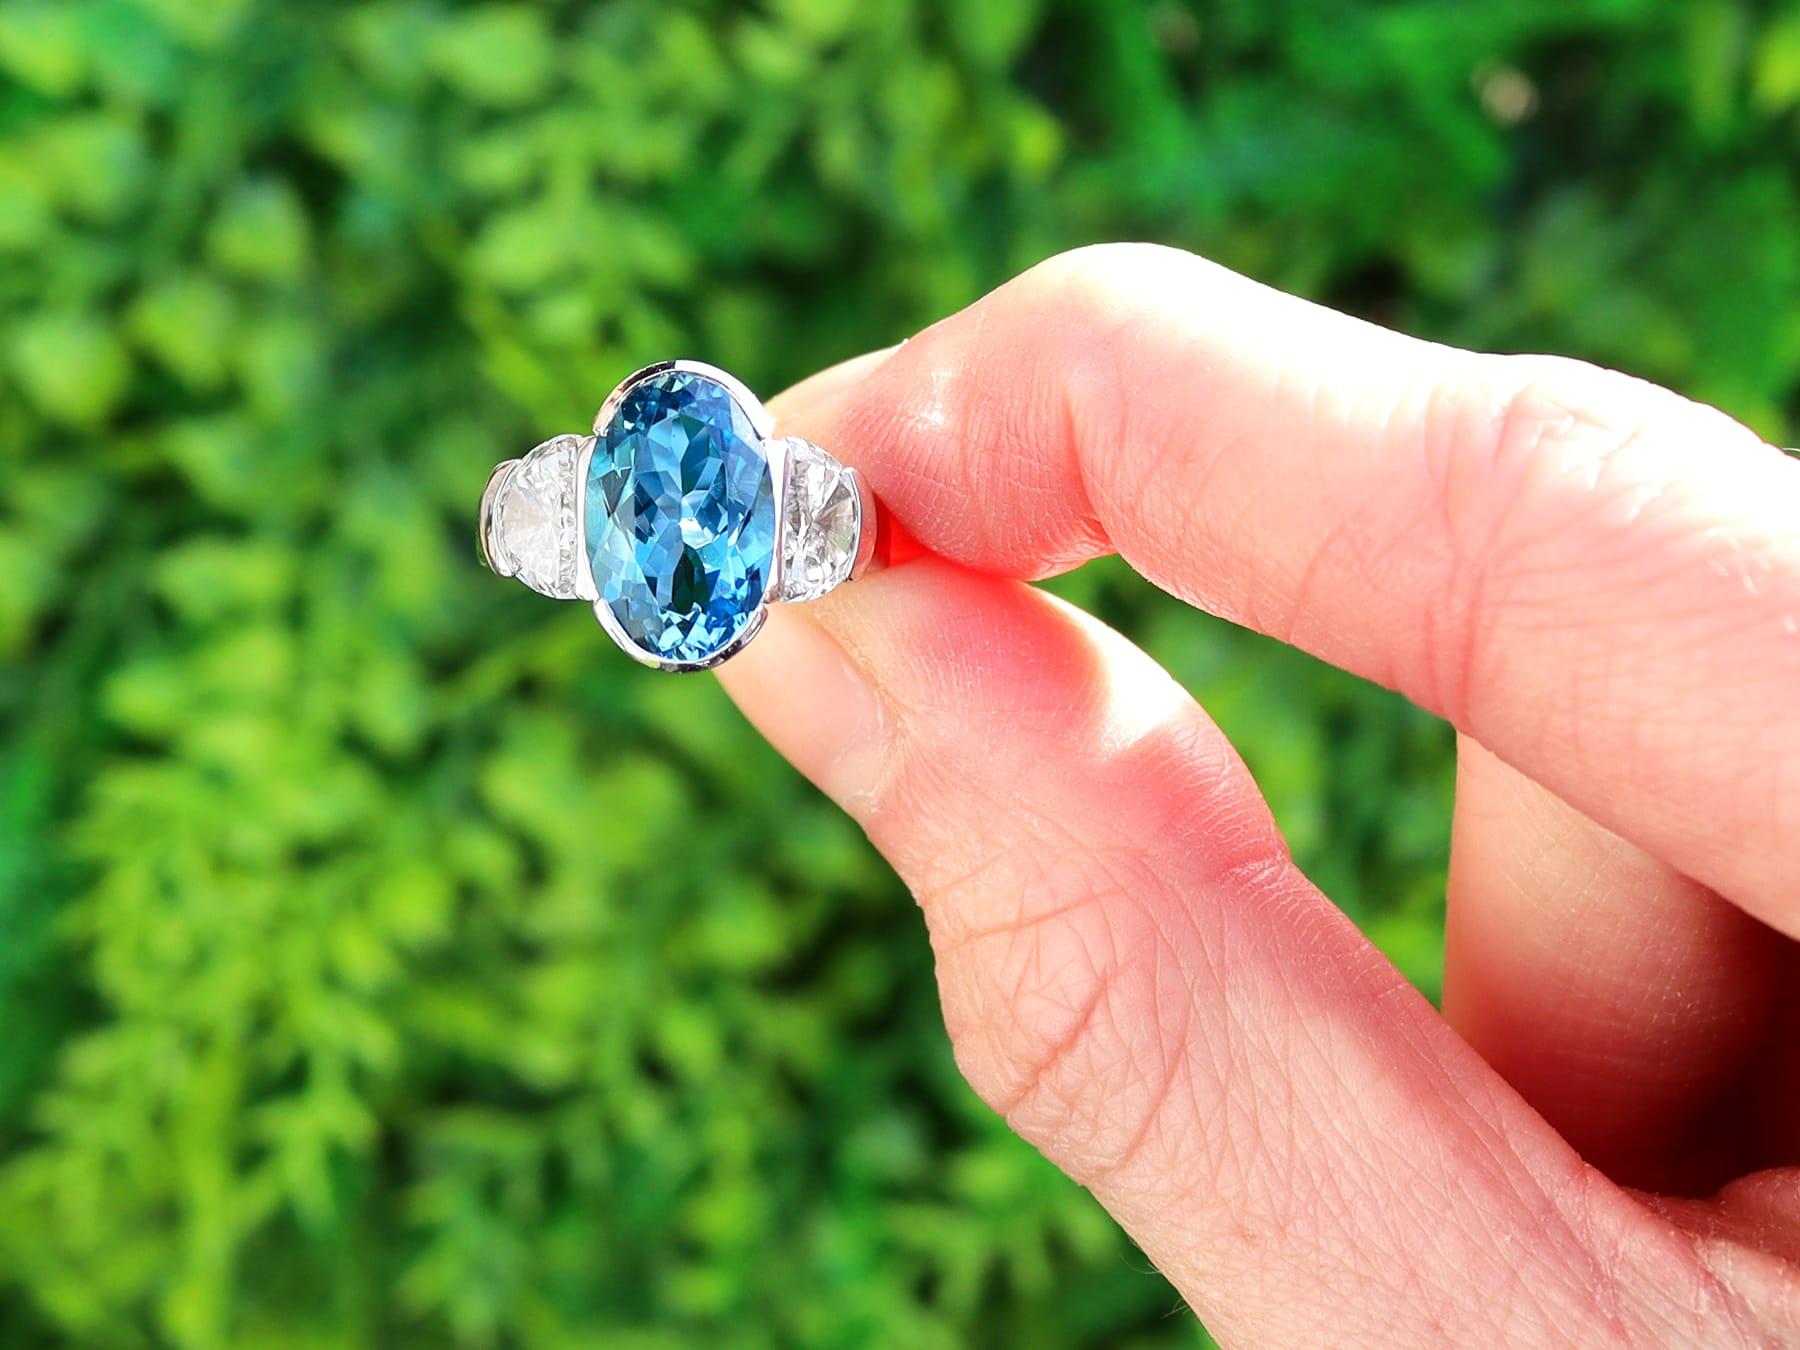 A stunning contemporary 3.28 carat aquamarine and 1.68 carat diamond, 18 karat white gold cocktail ring; part of our diverse aquamarine jewelry collections.

This stunning, fine and impressive contemporary aquamarine ring has been crafted in 18k